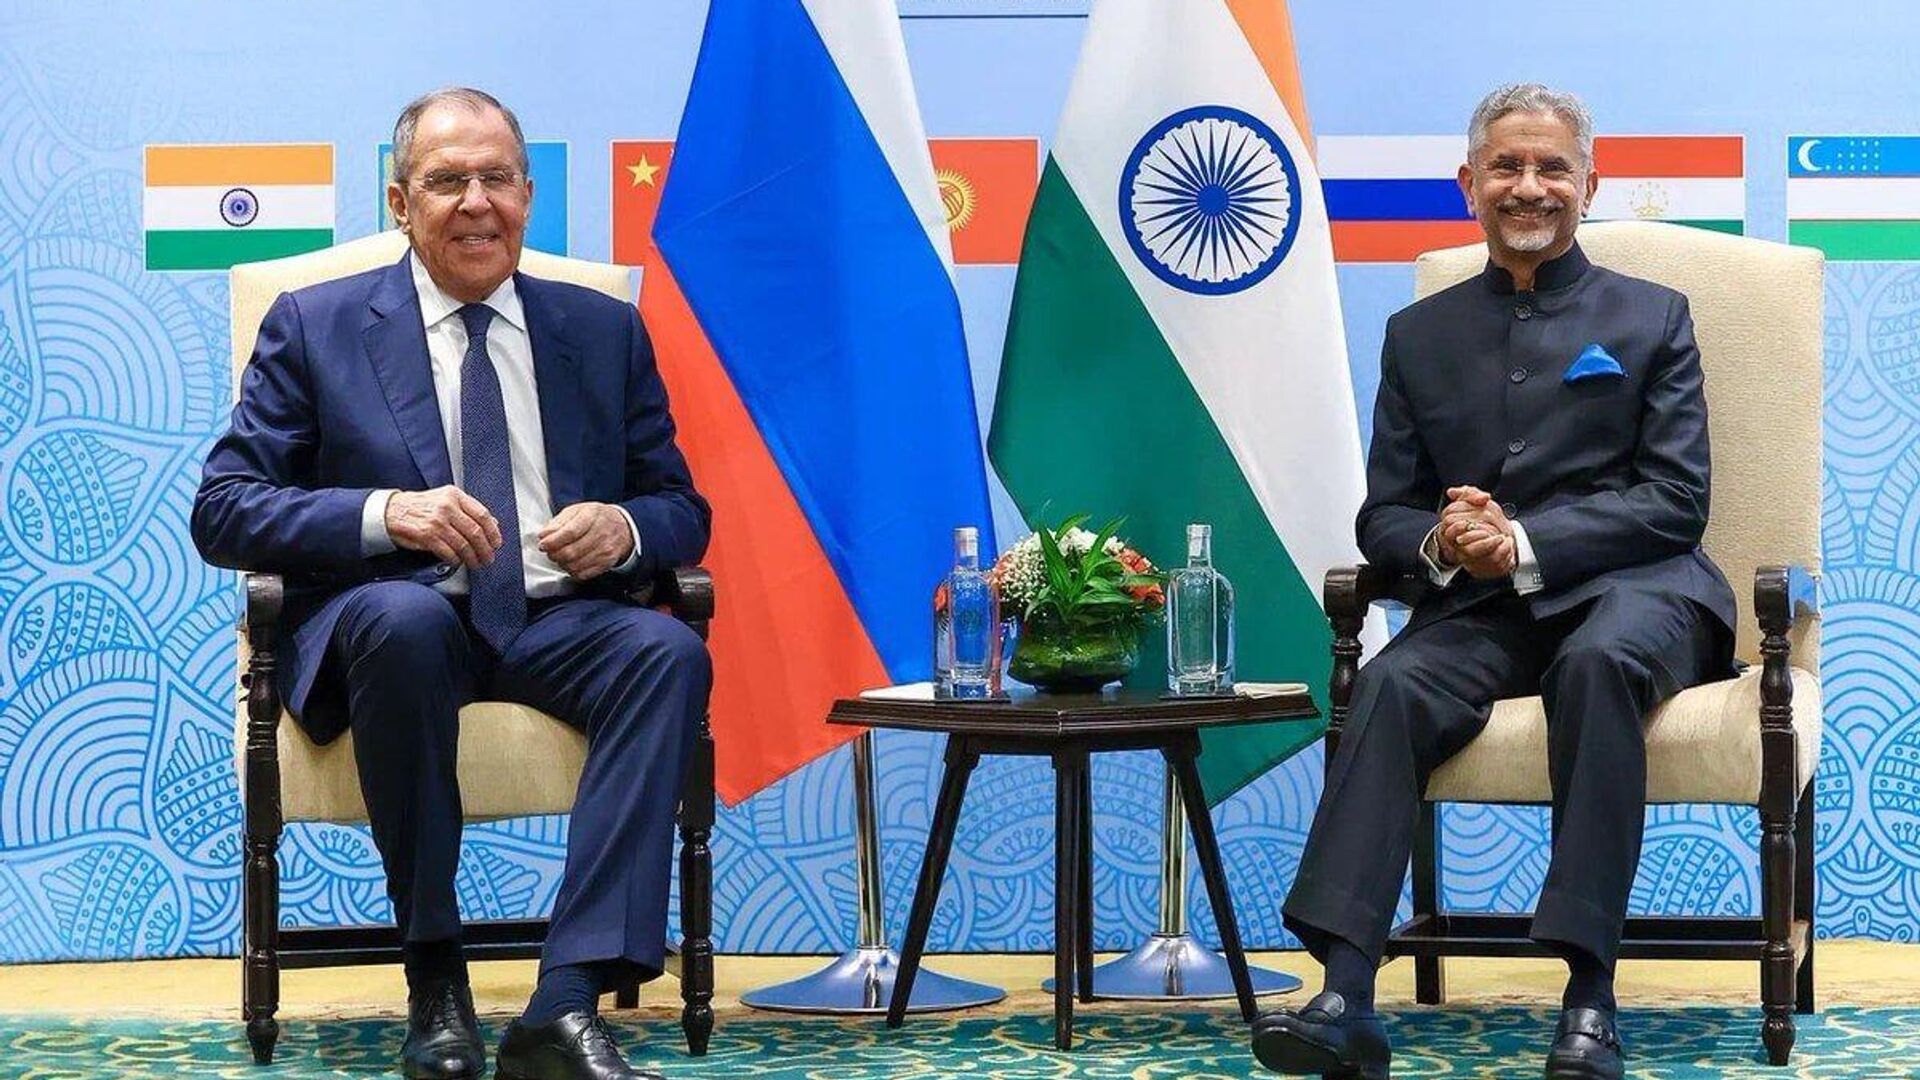 India and Russian foreign ministers hold talks in Goa on the sidelines of the SCO meet - Sputnik India, 1920, 04.05.2023